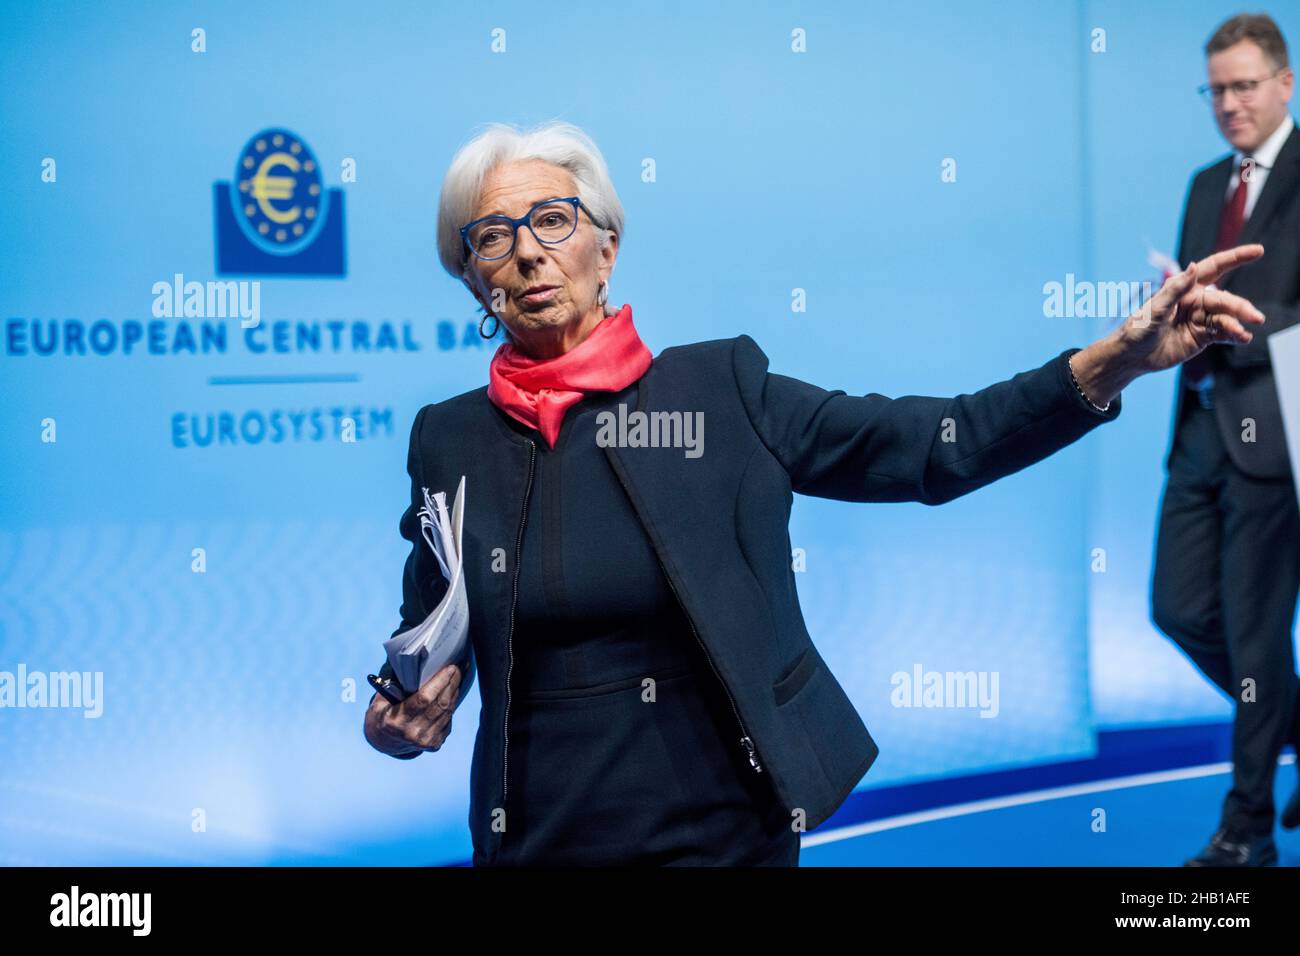 President of the European Central Bank (ECB) Christine Lagarde addresses a news conference, following a meeting of the governing council of the ECB on the eurozone monetary policy, in Frankfurt, western Germany, December 16, 2021. Thomas Lohnes/Pool via REUTERS Stock Photo